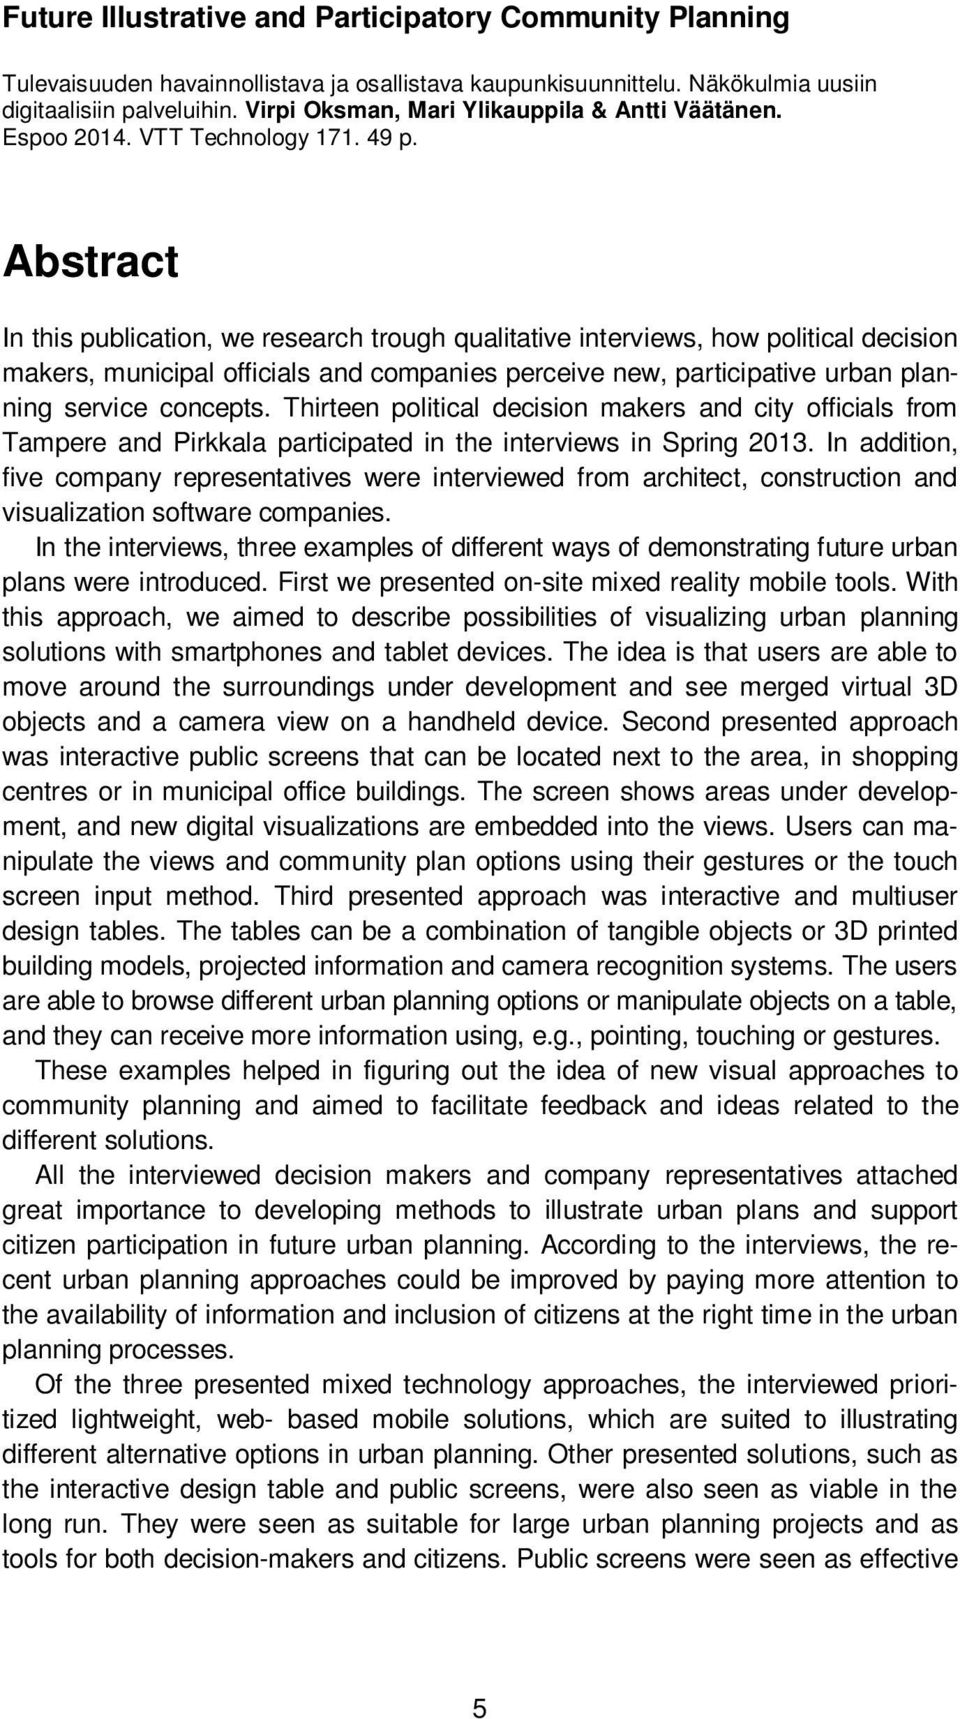 Abstract In this publication, we research trough qualitative interviews, how political decision makers, municipal officials and companies perceive new, participative urban planning service concepts.